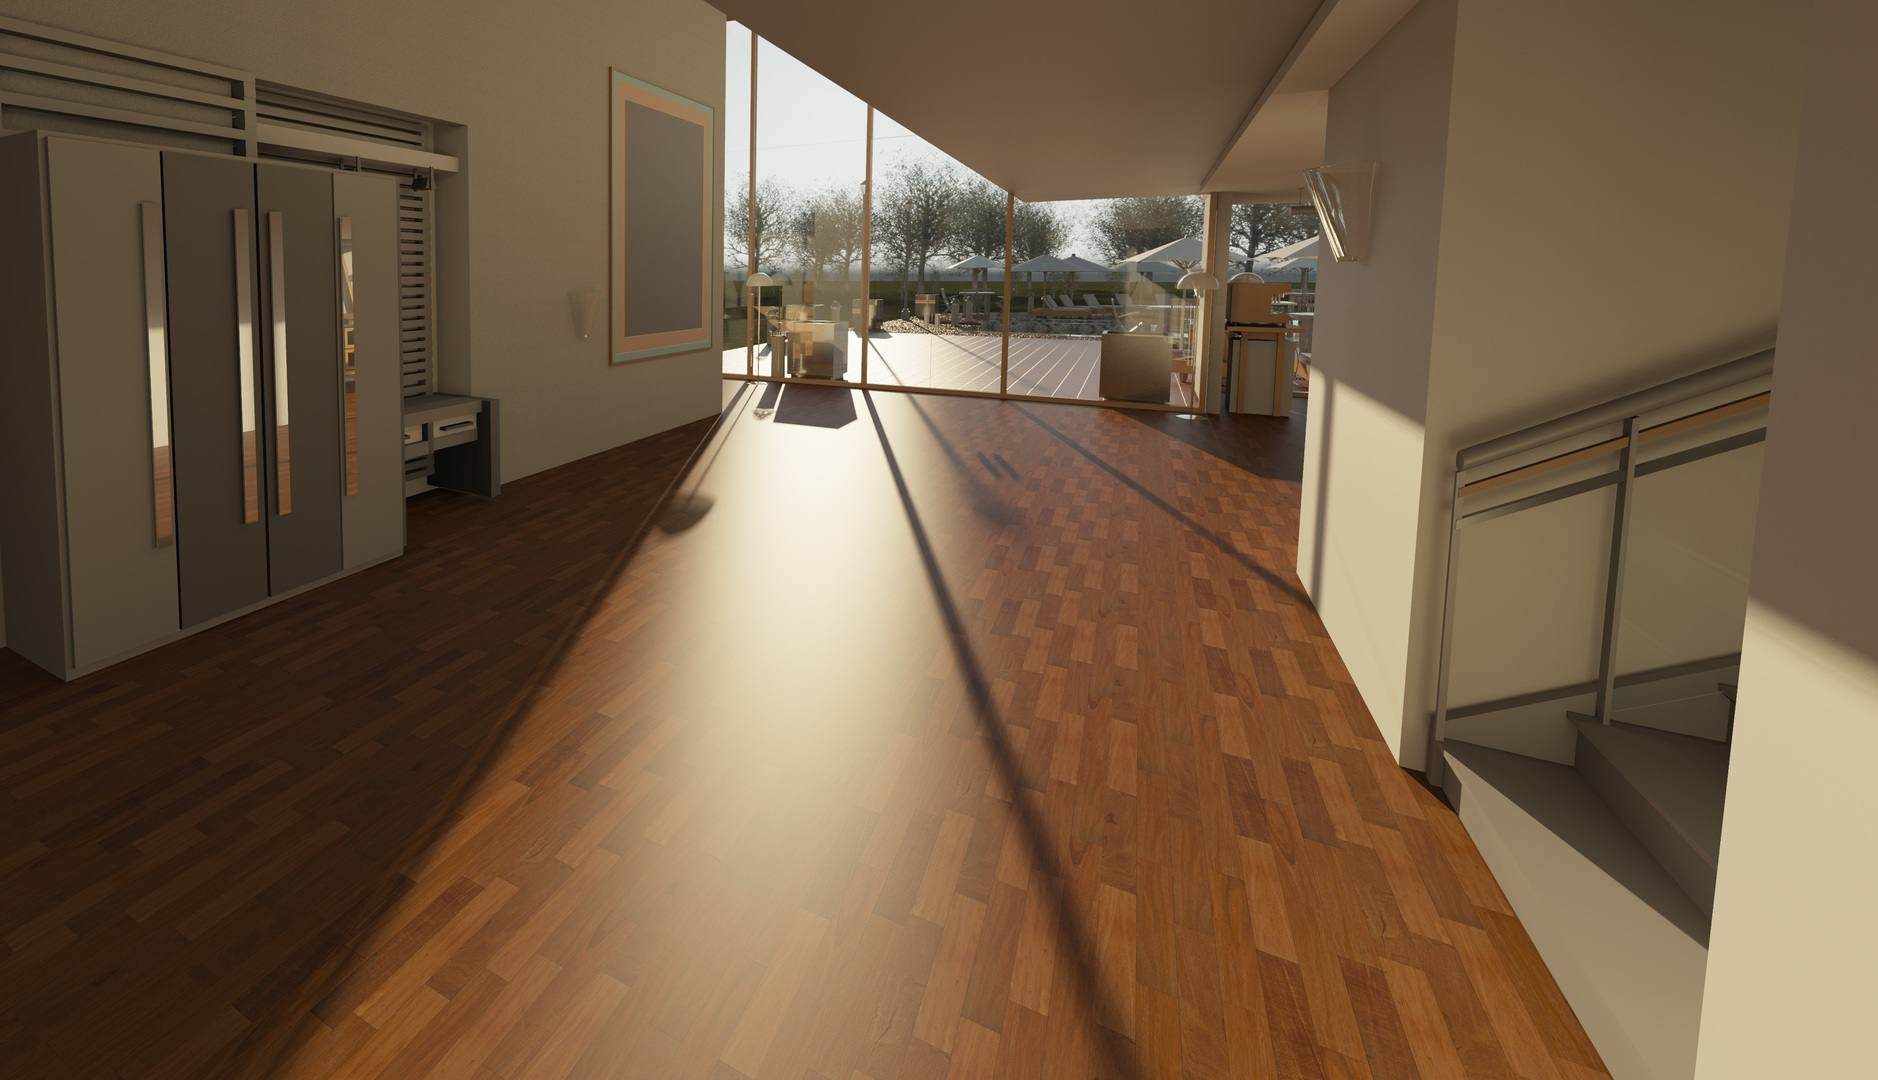 23 Wonderful Hardwood Look Laminate Flooring 2024 free download hardwood look laminate flooring of common flooring types currently used in renovation and building inside architecture wood house floor interior window 917178 pxhere com 5ba27a2cc9e77c00503b